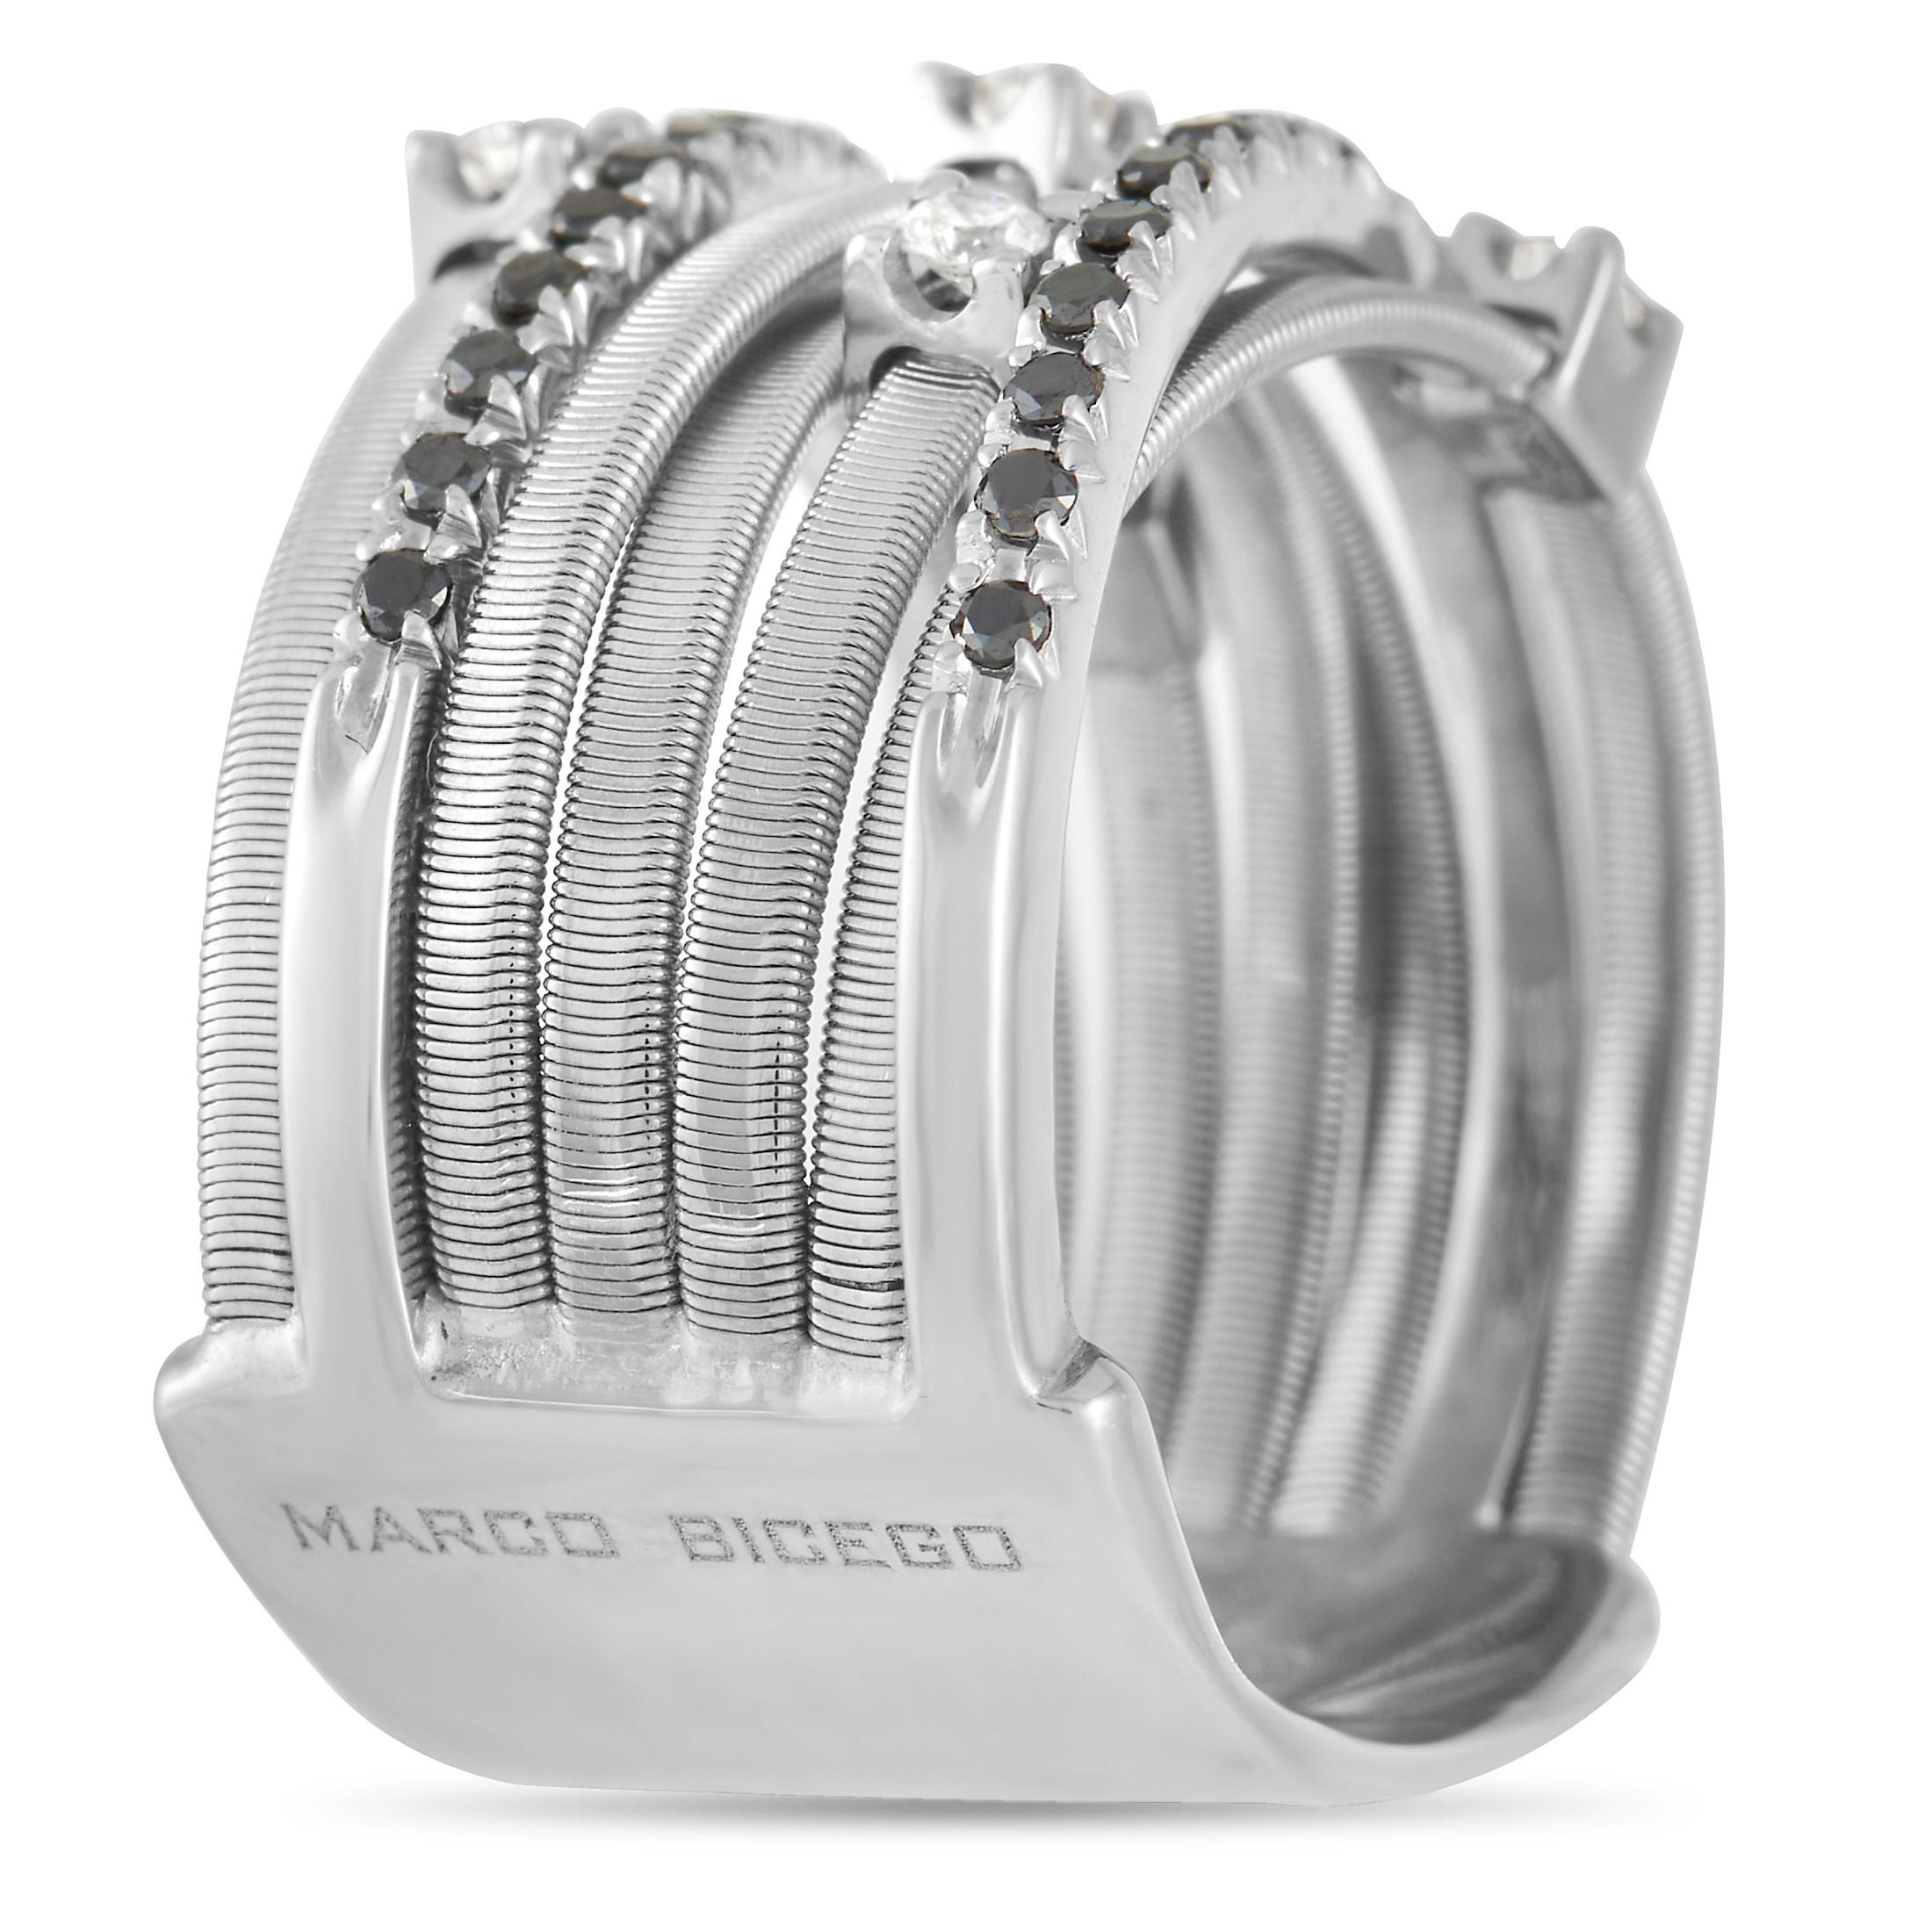 This ring from Marco Bicego has a contemporary sense of style that you’ve never seen before. Crafted from 18K White Gold, corded strands put 0.25 carats of white diamonds and 0.25 carats of black diamonds boldly on display. This stylish design